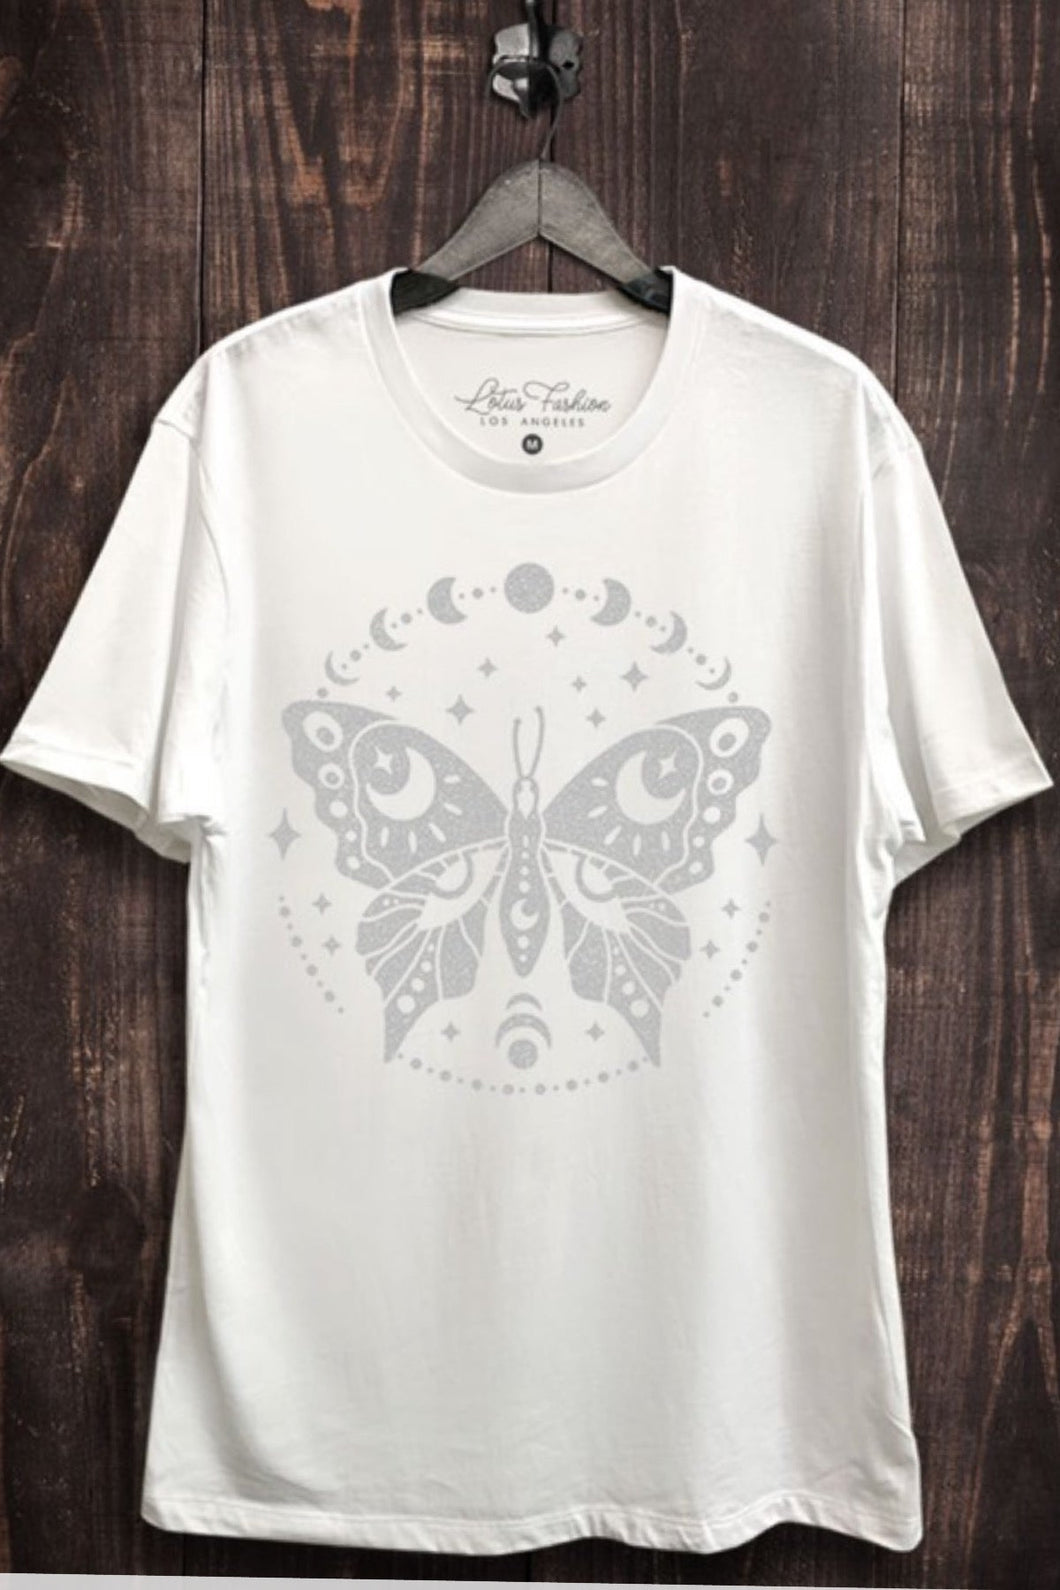 External Butterfly Moon Phase Lotus Brand Tee